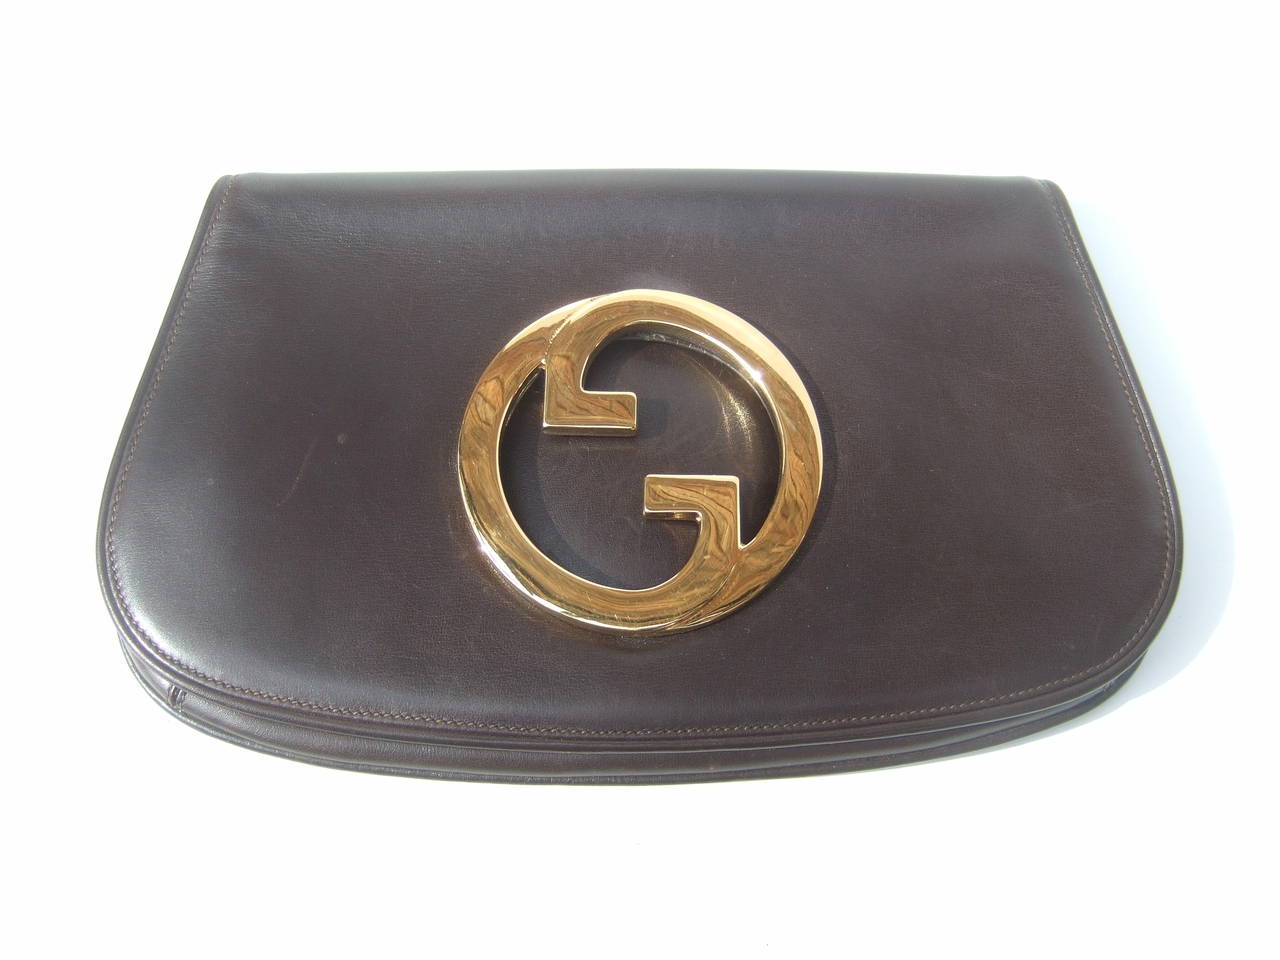 Black Gucci Iconic Chocolate Brown Leather Blondie Clutch c 1970